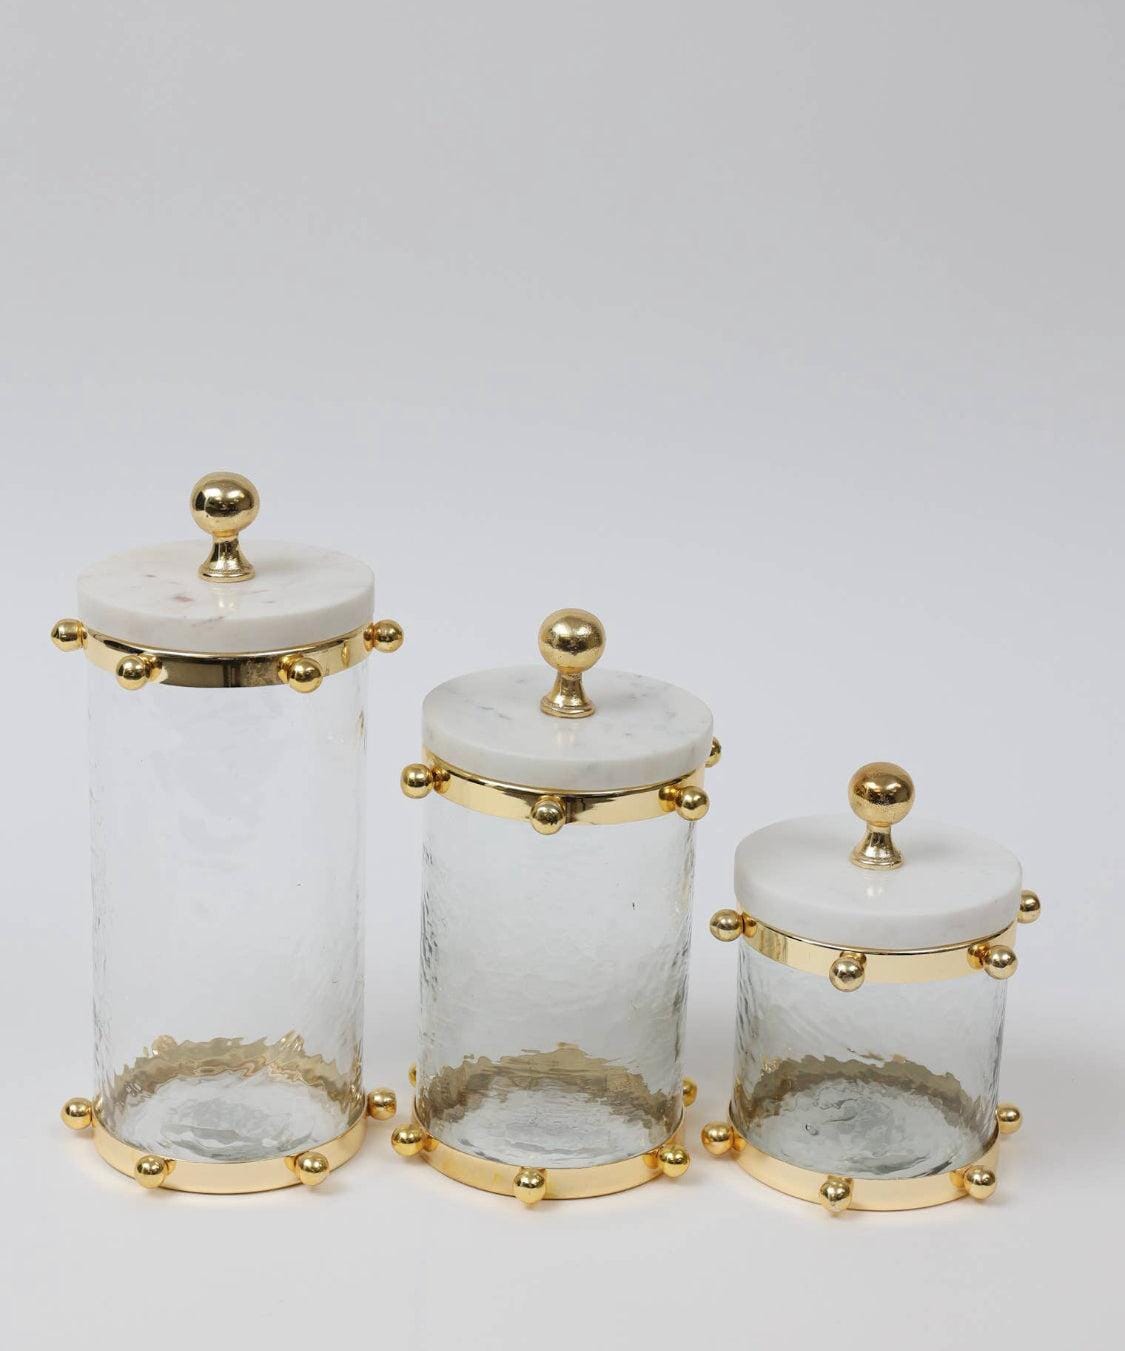 Hammered Glass Canister w/ Gold Ball Design and Marble Cover Canisters High Class Touch - Home Decor Set of 3 